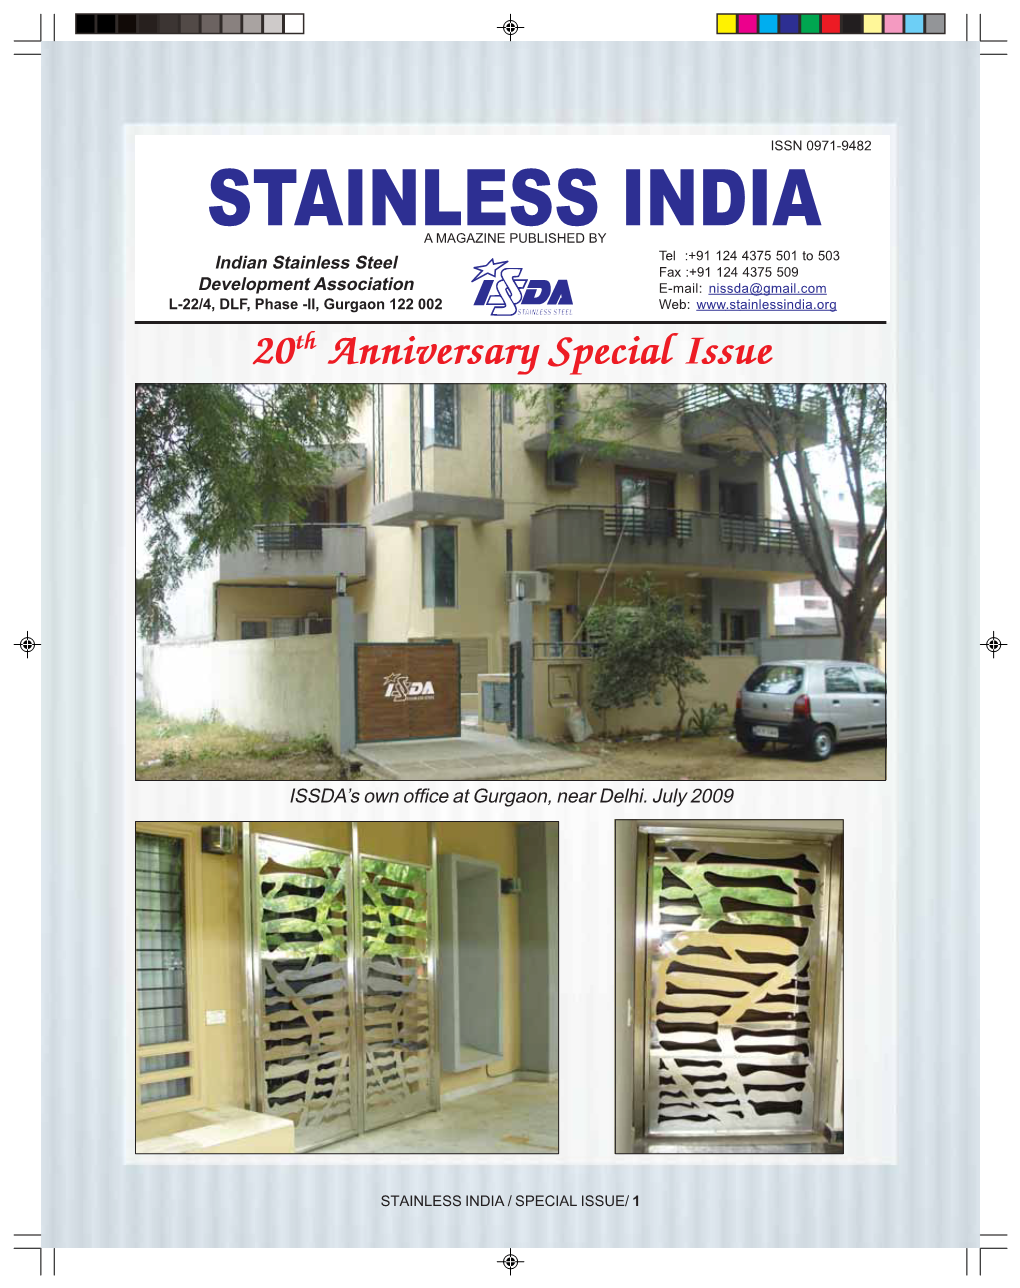 Stainless India